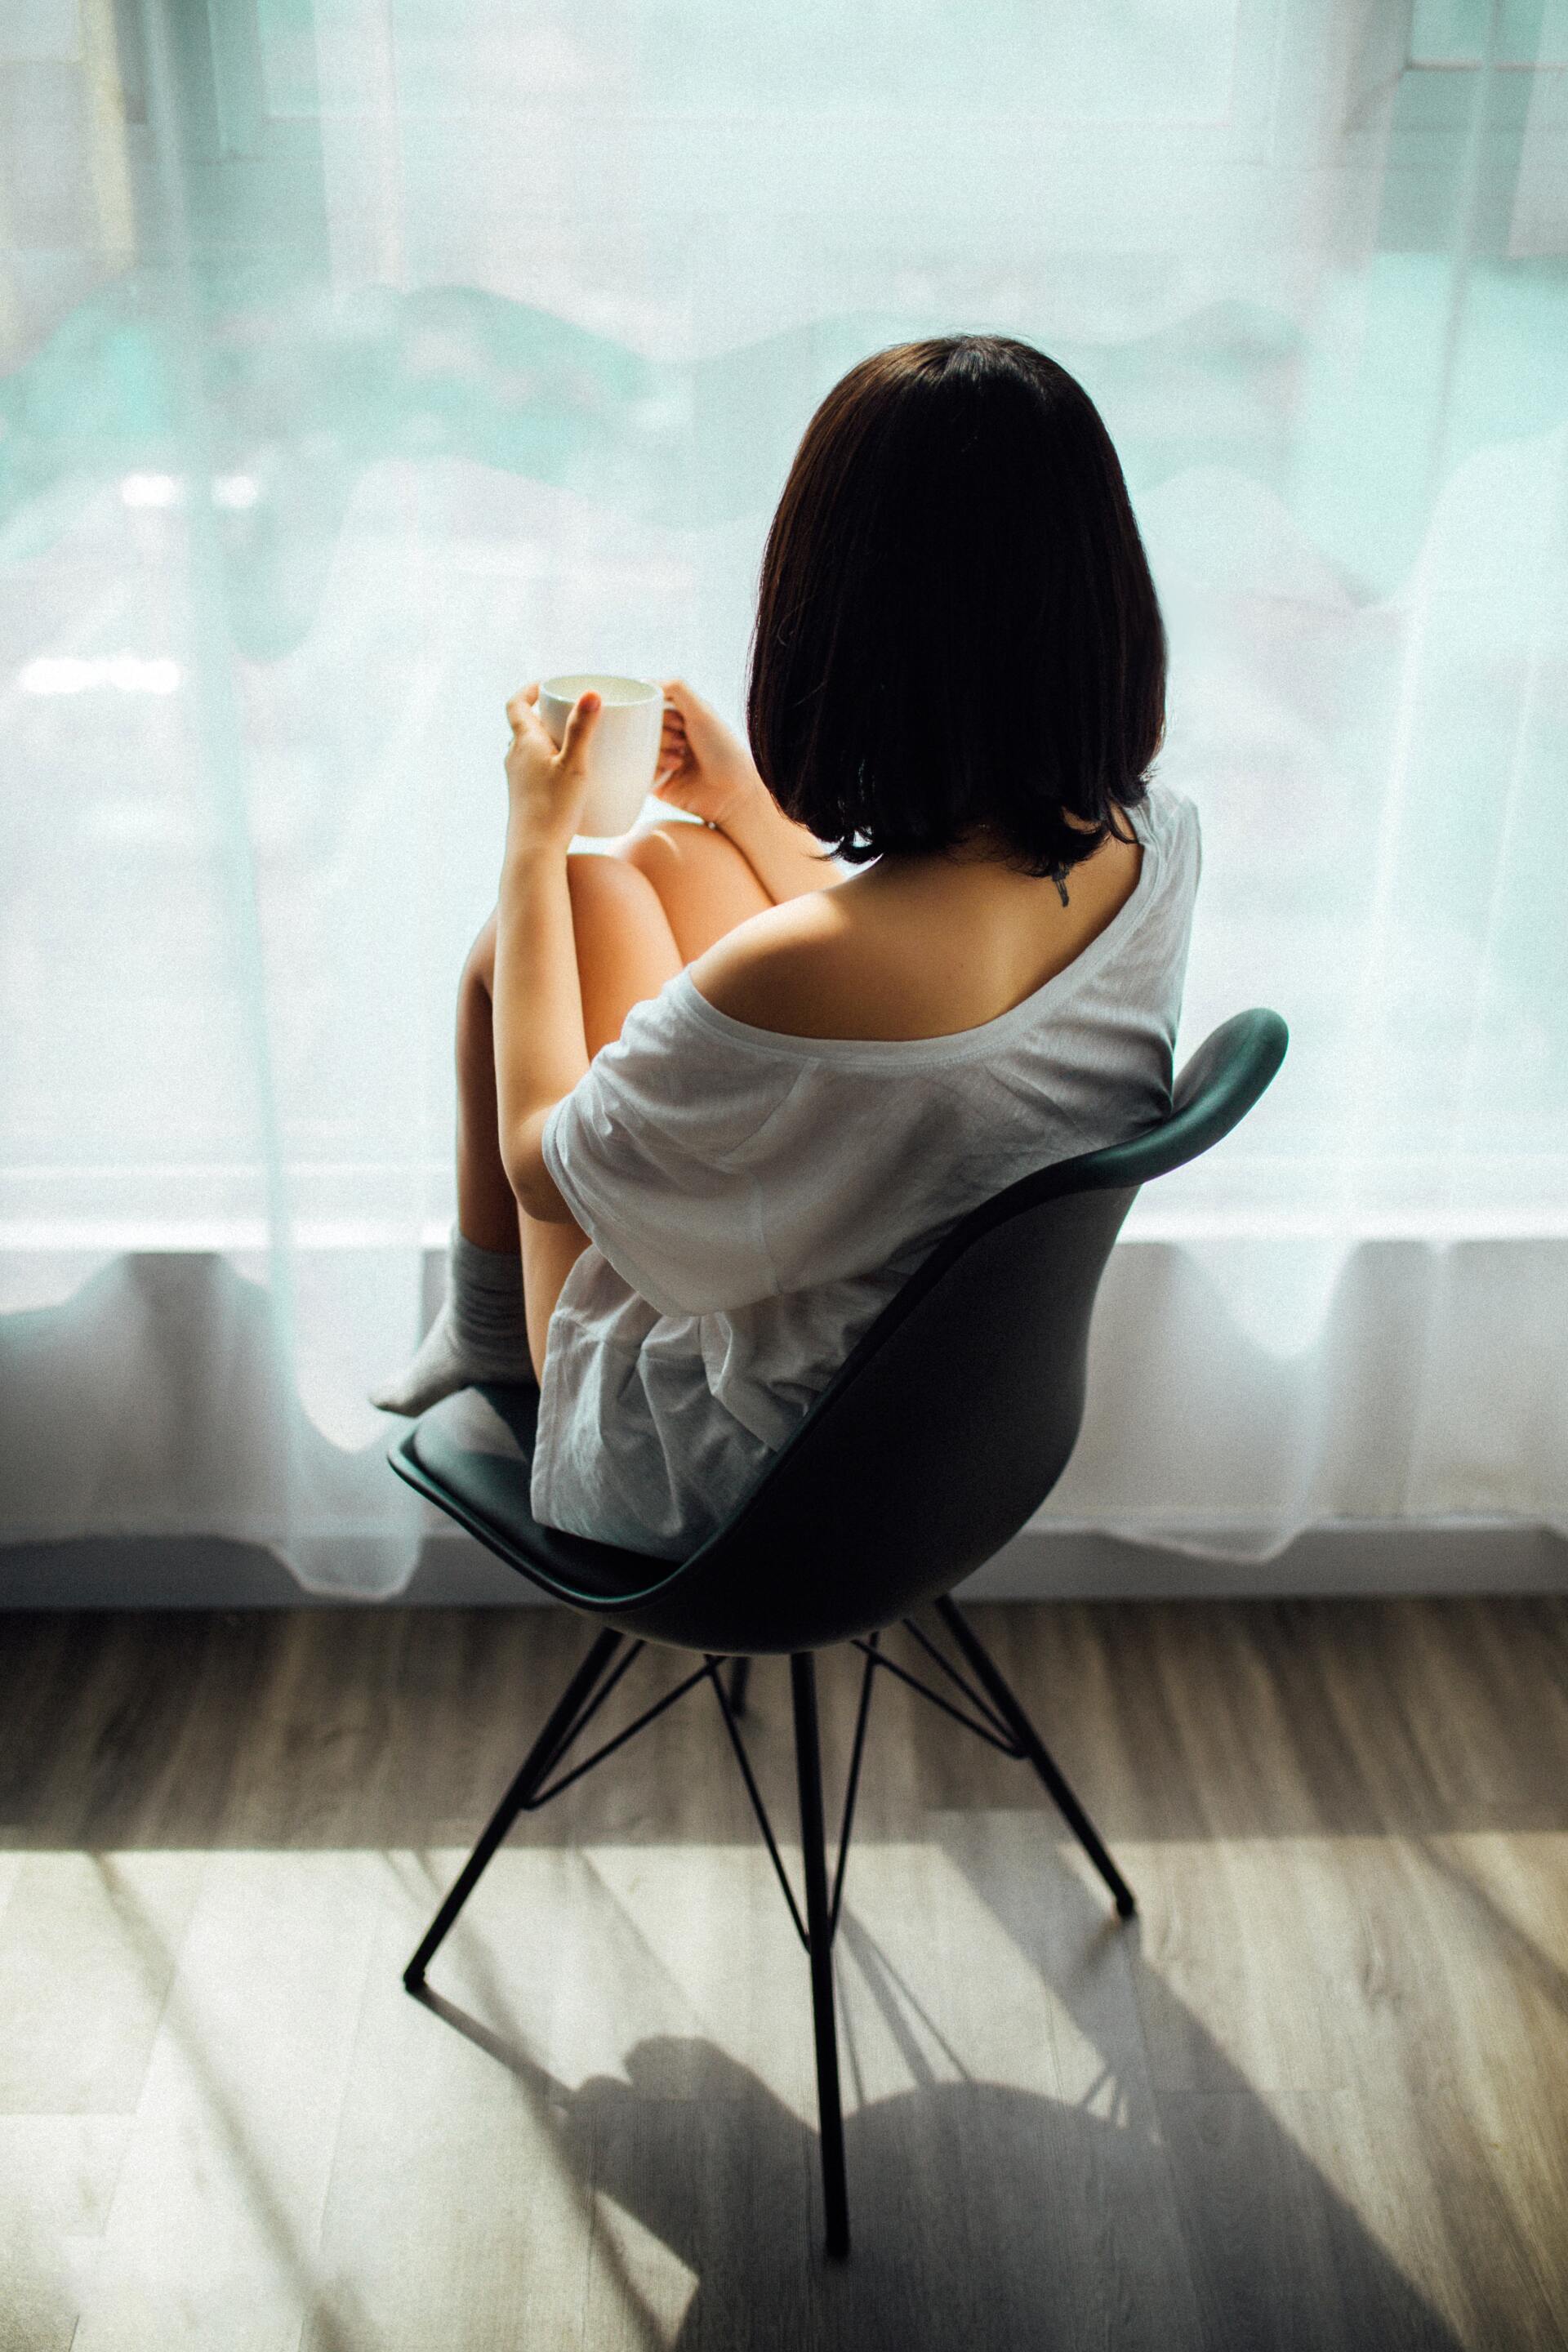 Someone sitting on a chair. Lonely. This image represents how lonely living with chronic illness can be. Miami therapist describes ways to reduce loneliness.